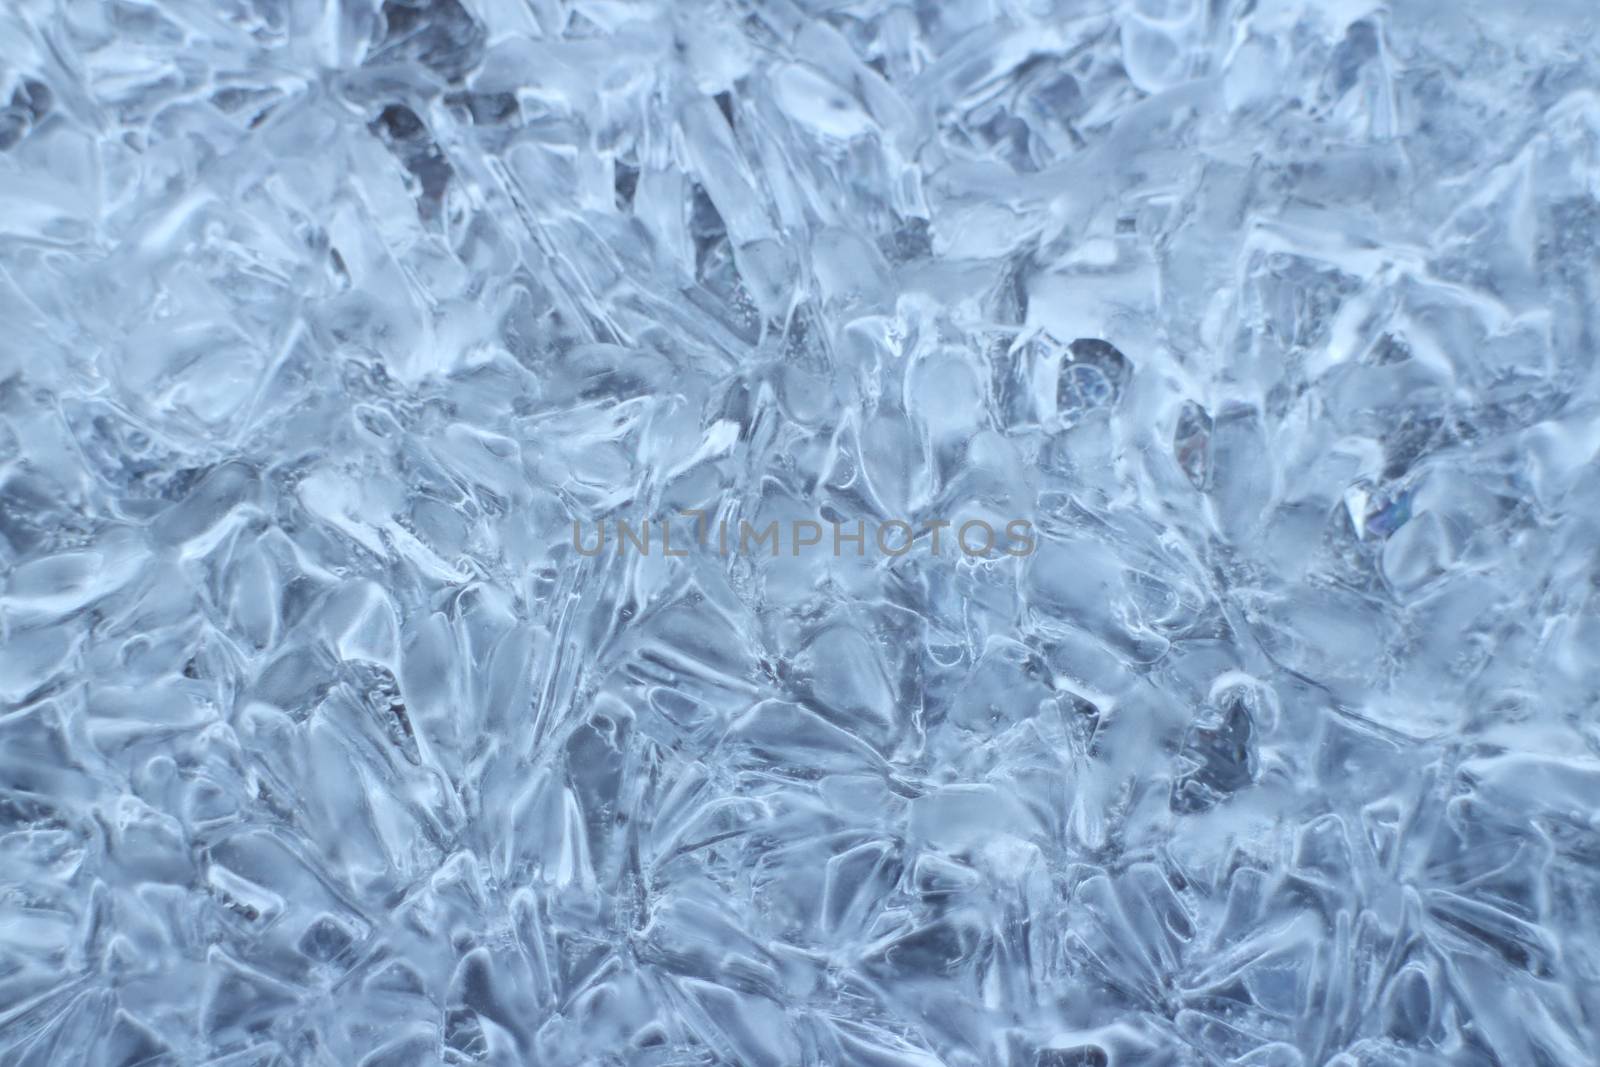 Large ice crystals frozen water by mrivserg